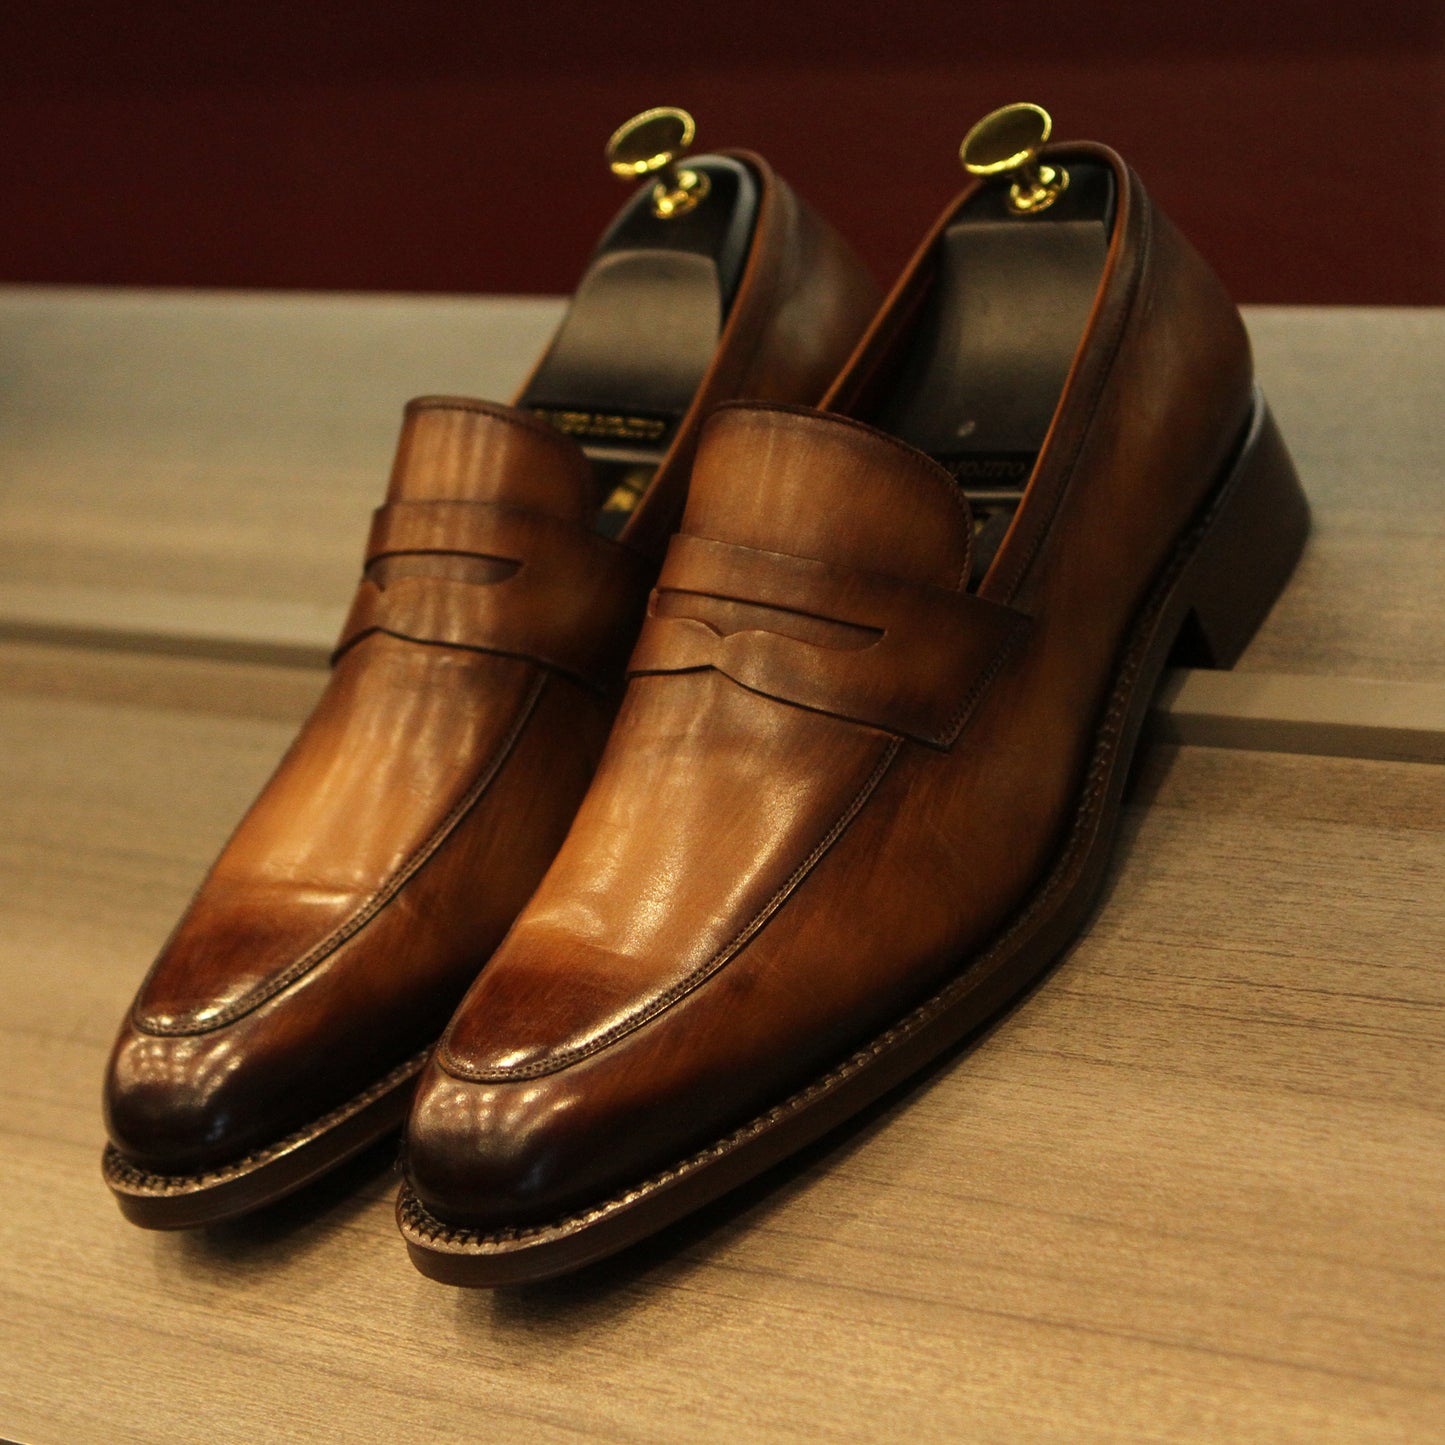 GYW Masterpiece Penny Loafer - Tobacco